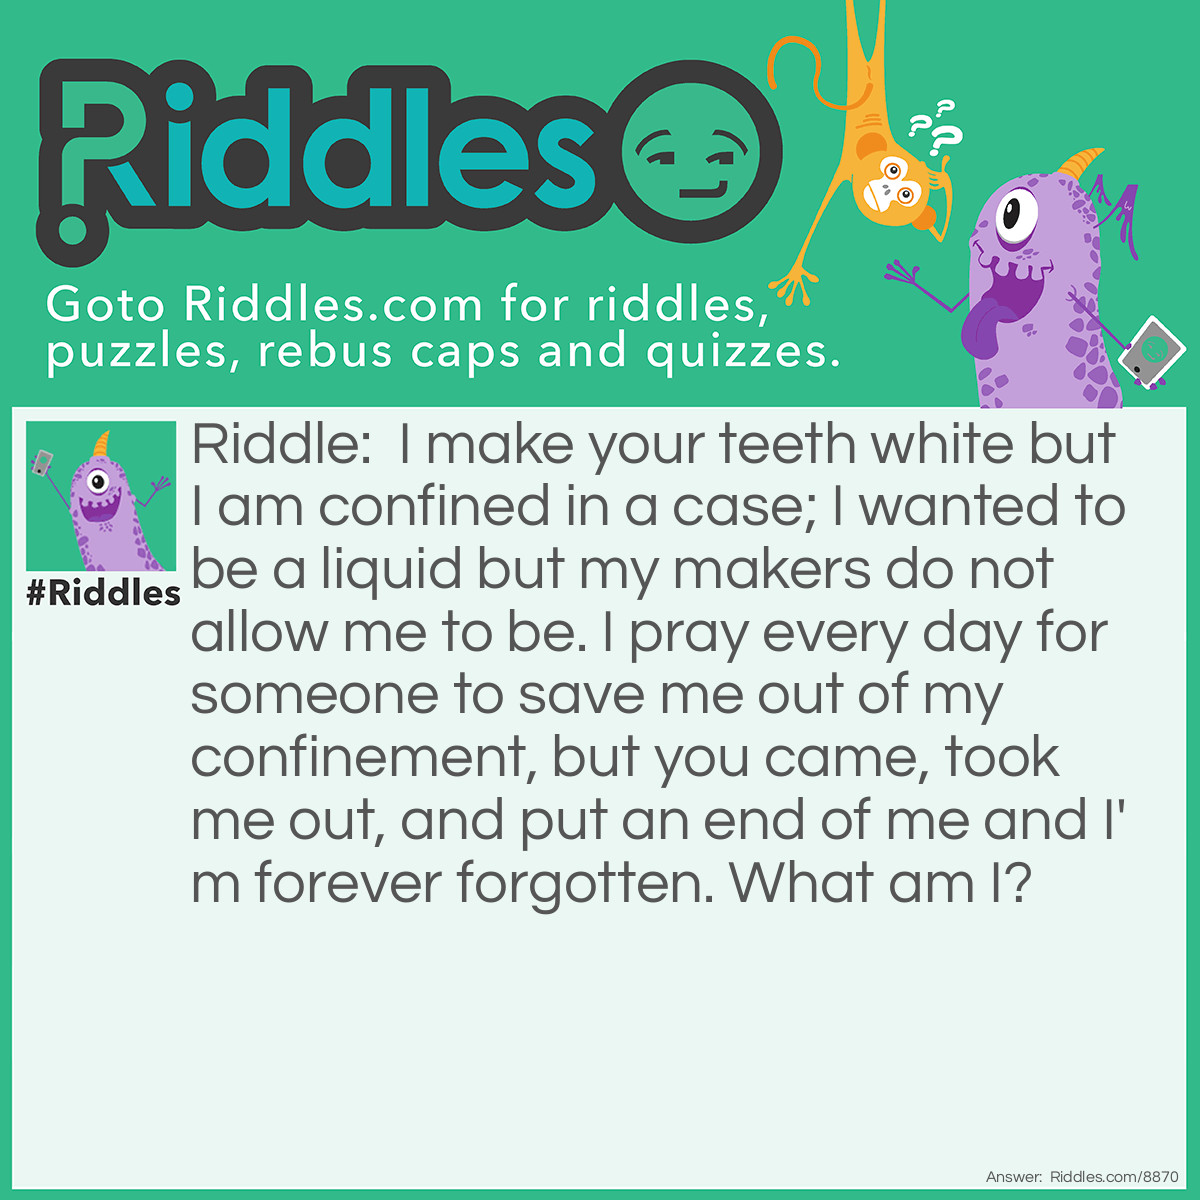 Riddle: I make your teeth white but I am confined in a case; I wanted to be a liquid but my makers do not allow me to be. I pray every day for someone to save me out of my confinement, but you came, took me out, and put an end of me and I'm forever forgotten. What am I? Answer: Tooth paste.